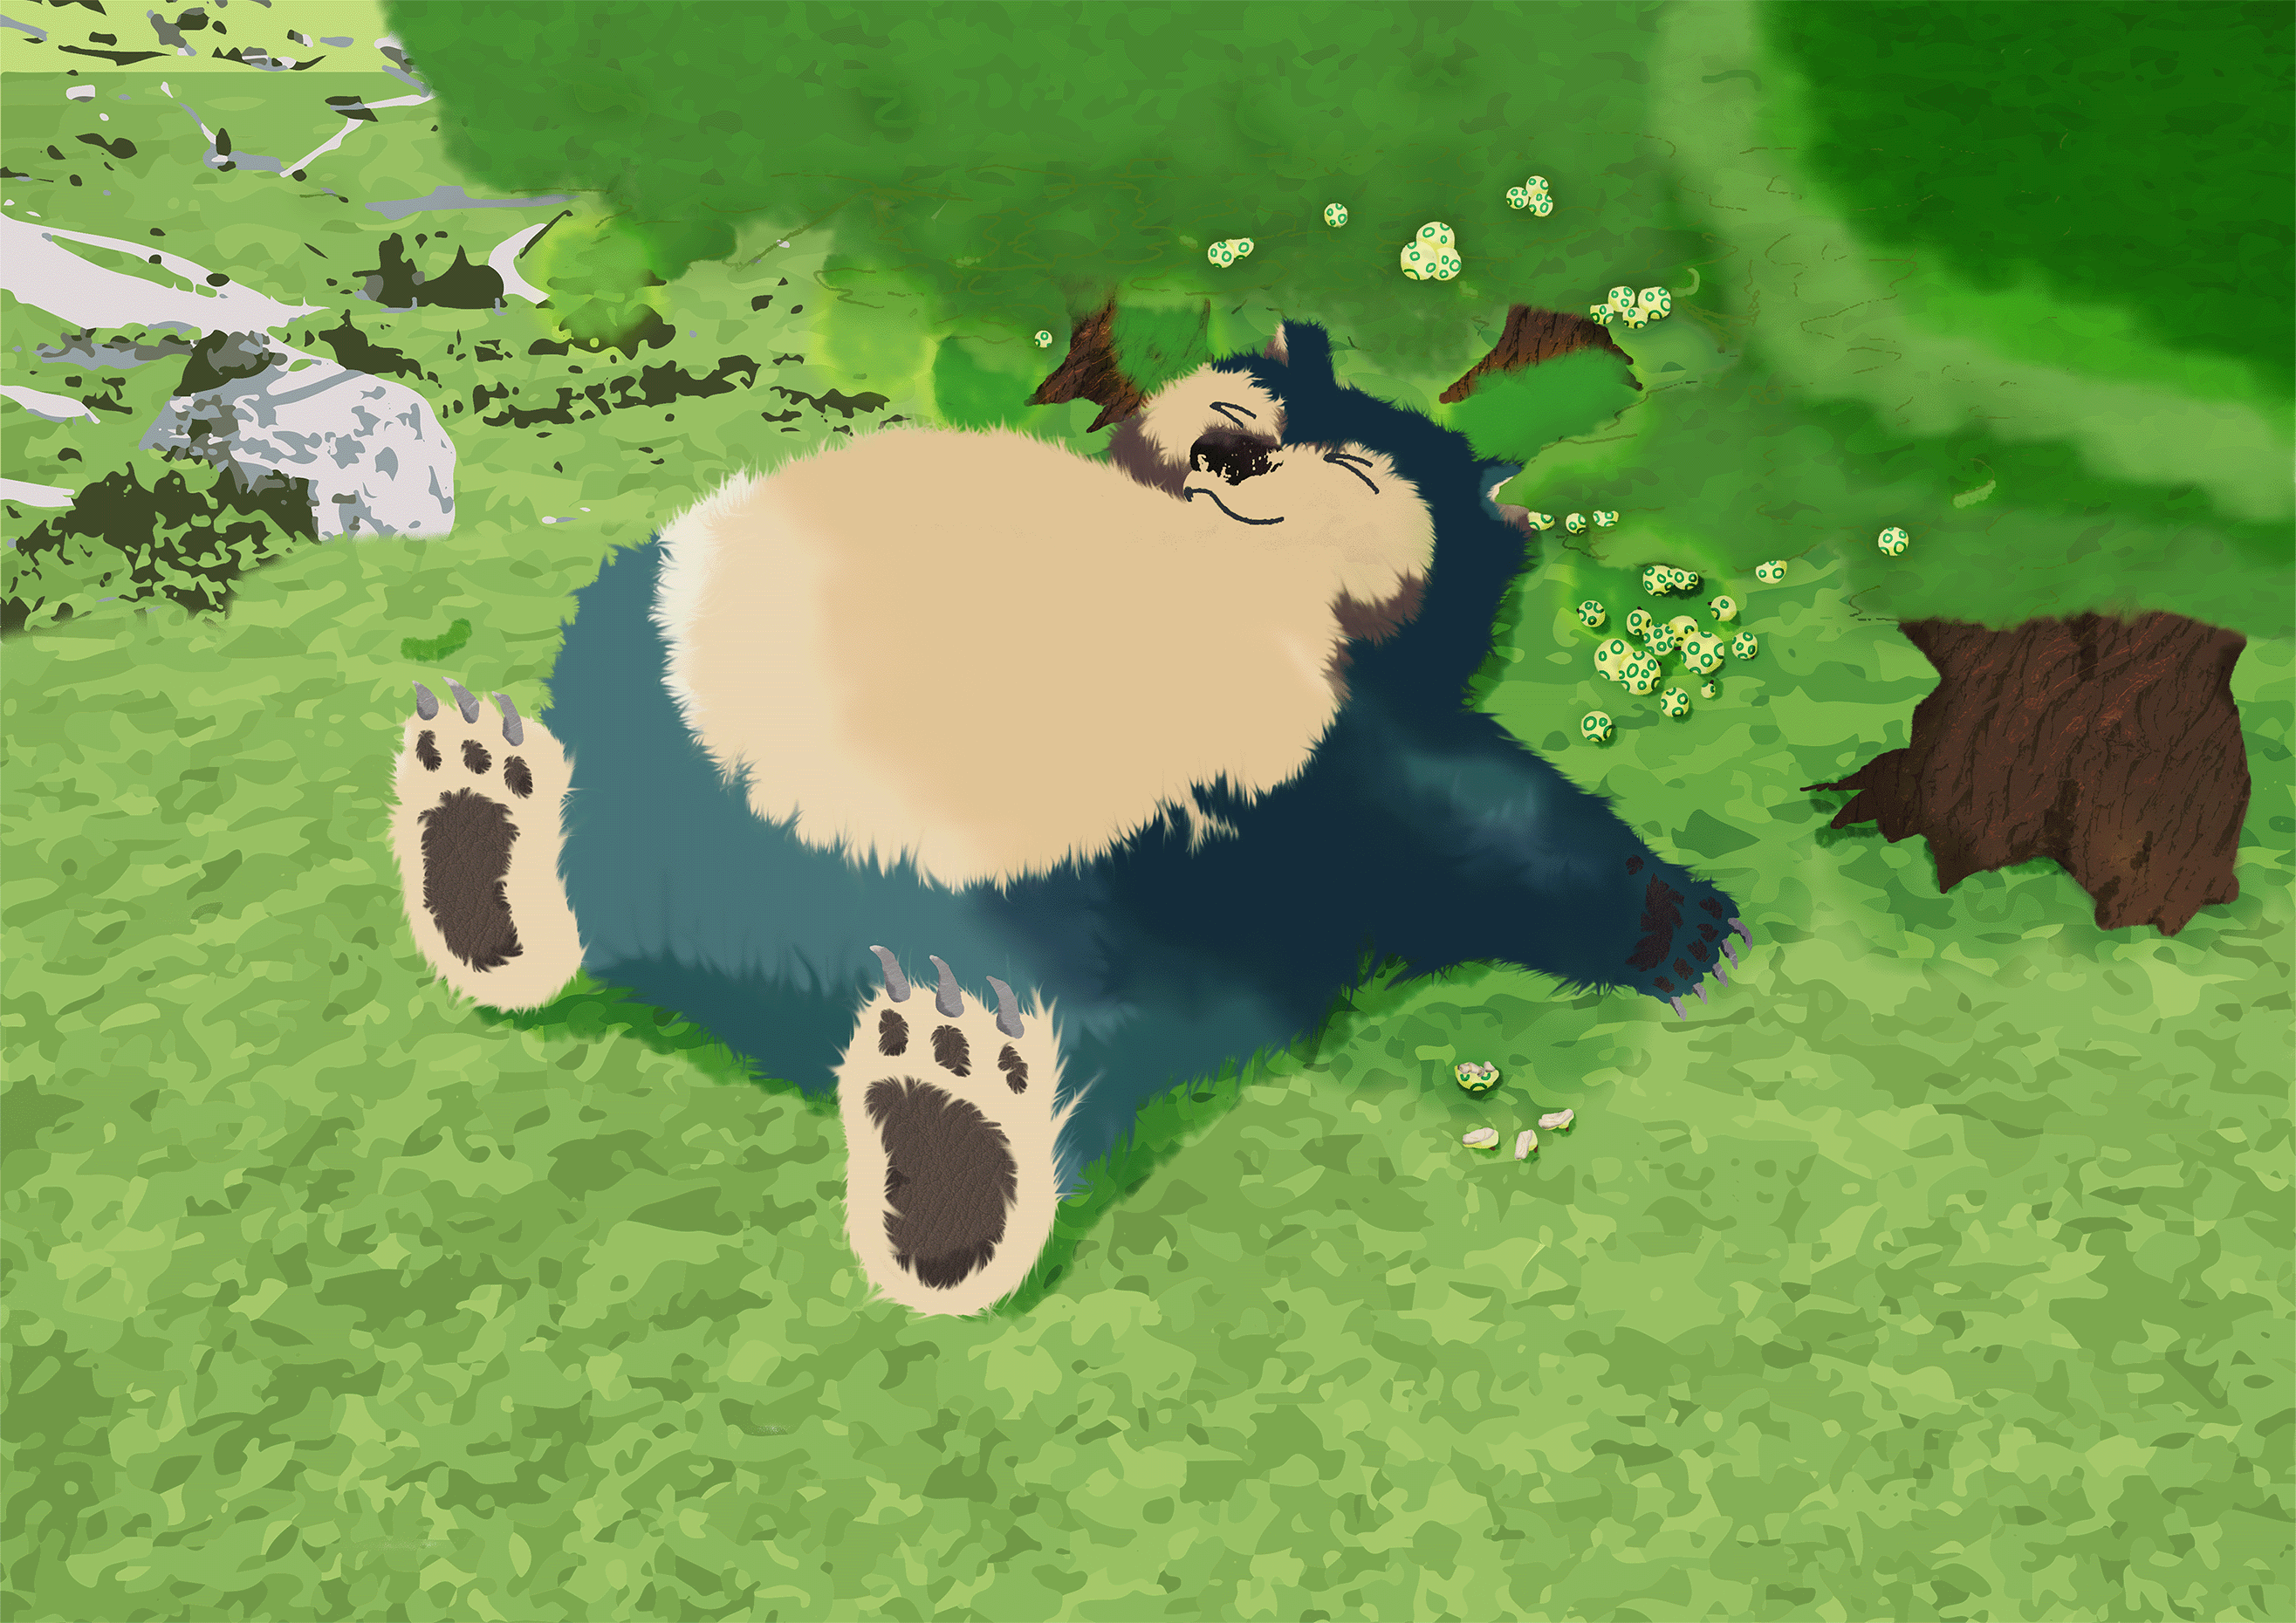 Large bearlike Pokemon laying under trees by a pile of berries